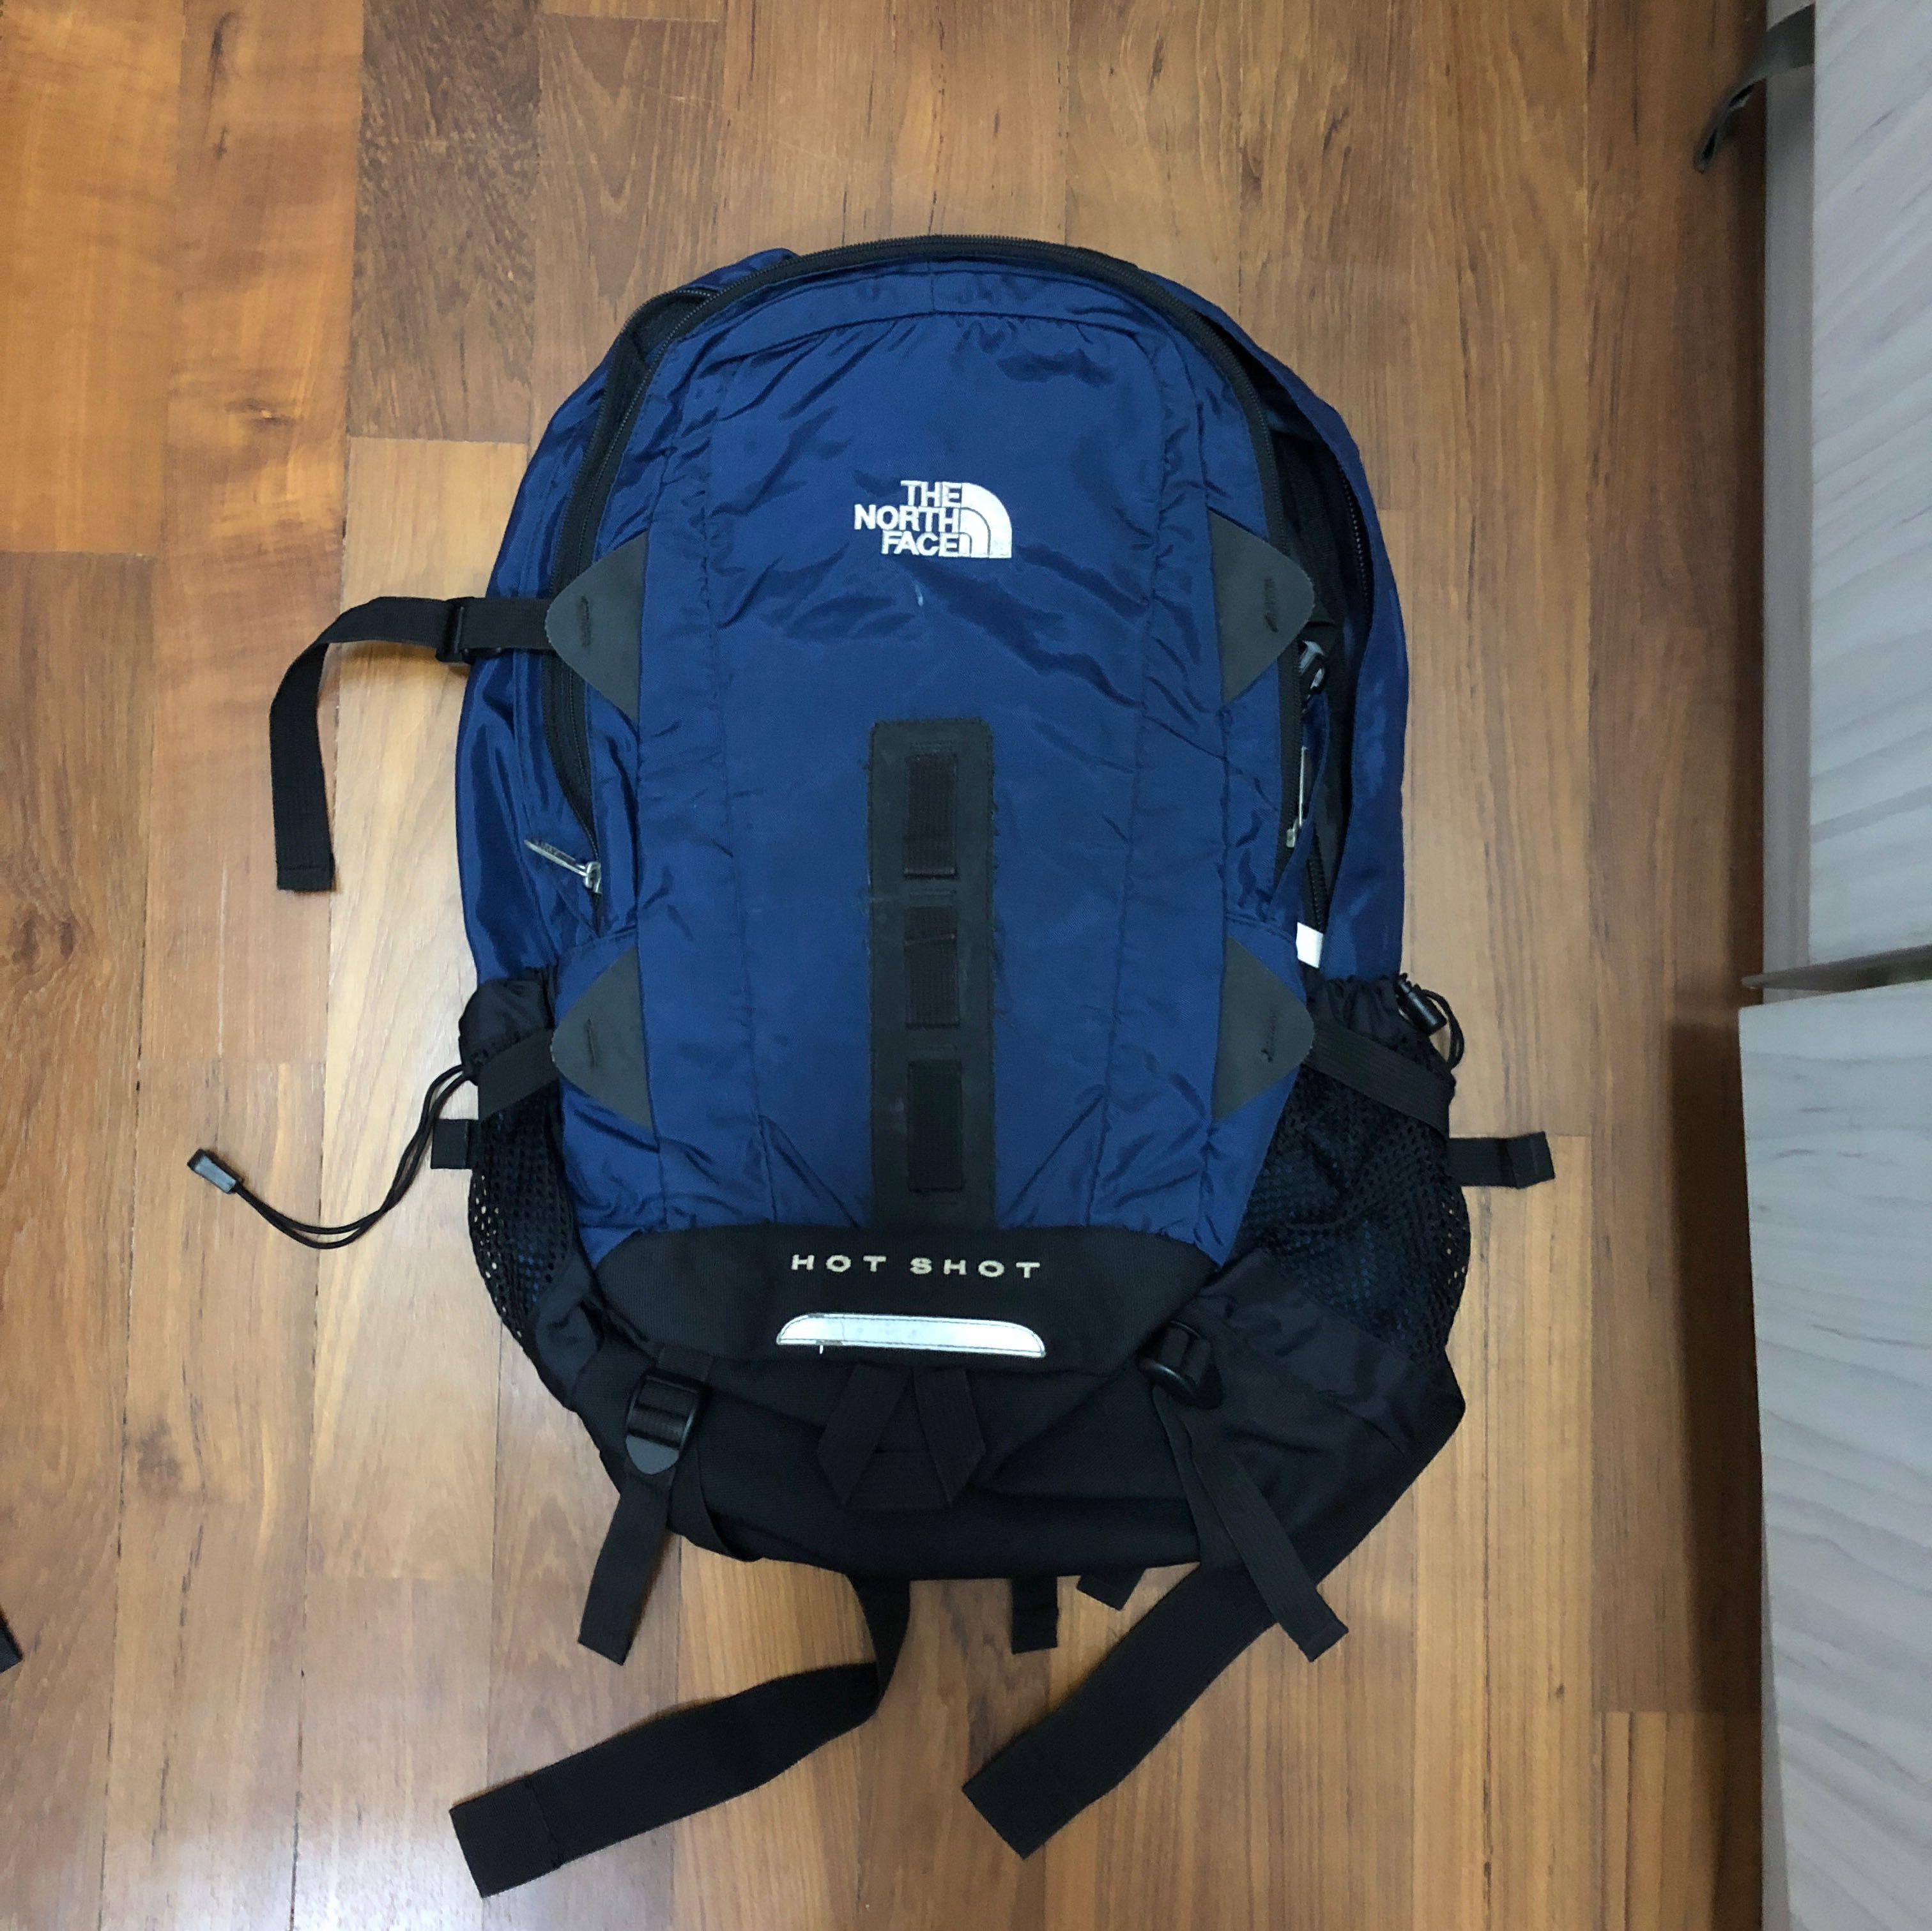 North Face Hot Shot Backpack Men S Fashion Bags Wallets Backpacks On Carousell